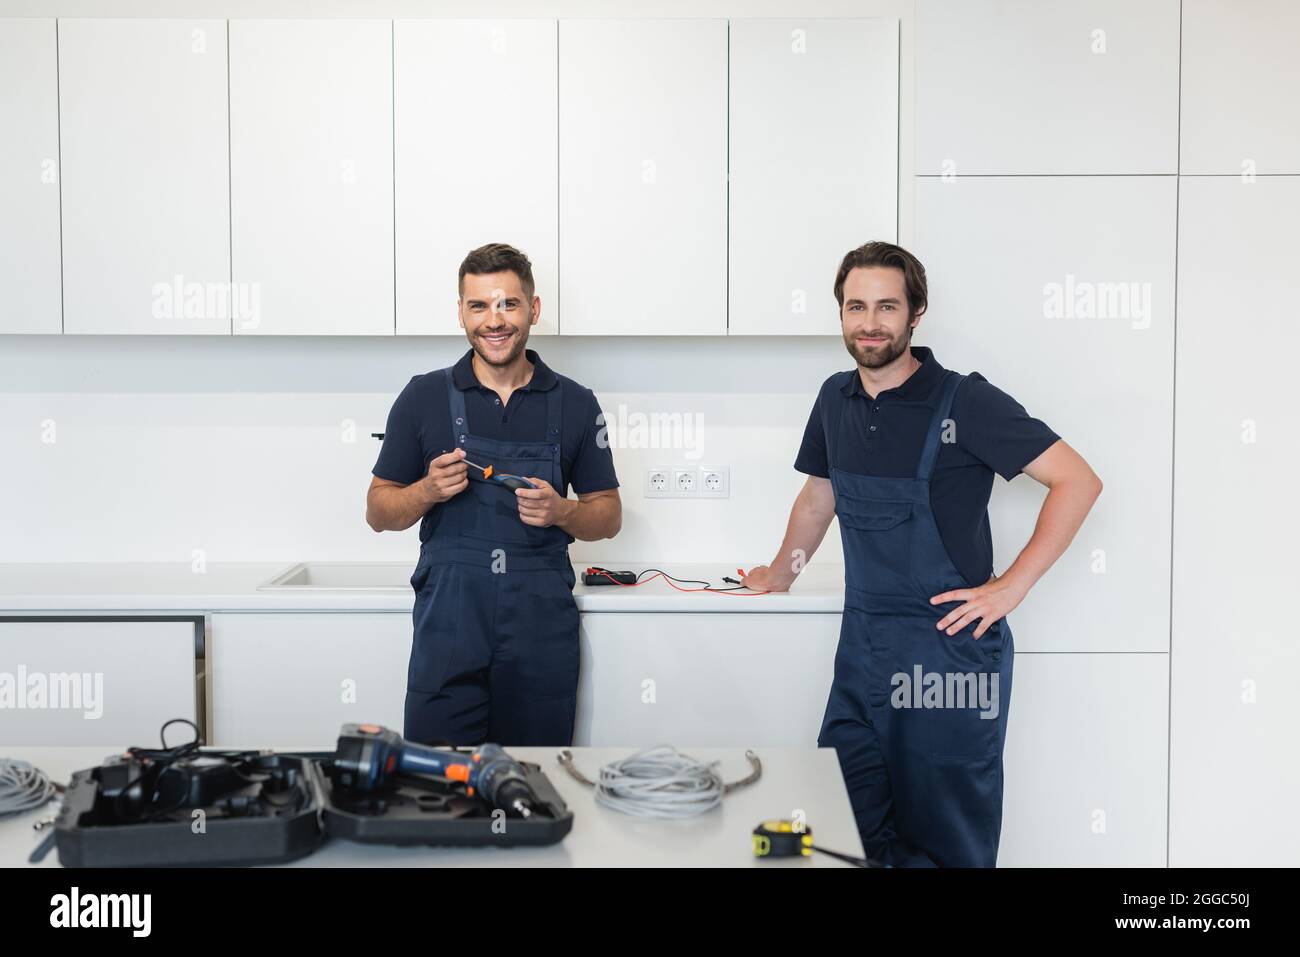 smiling handymen looking at camera near tools on kitchen table Stock Photo